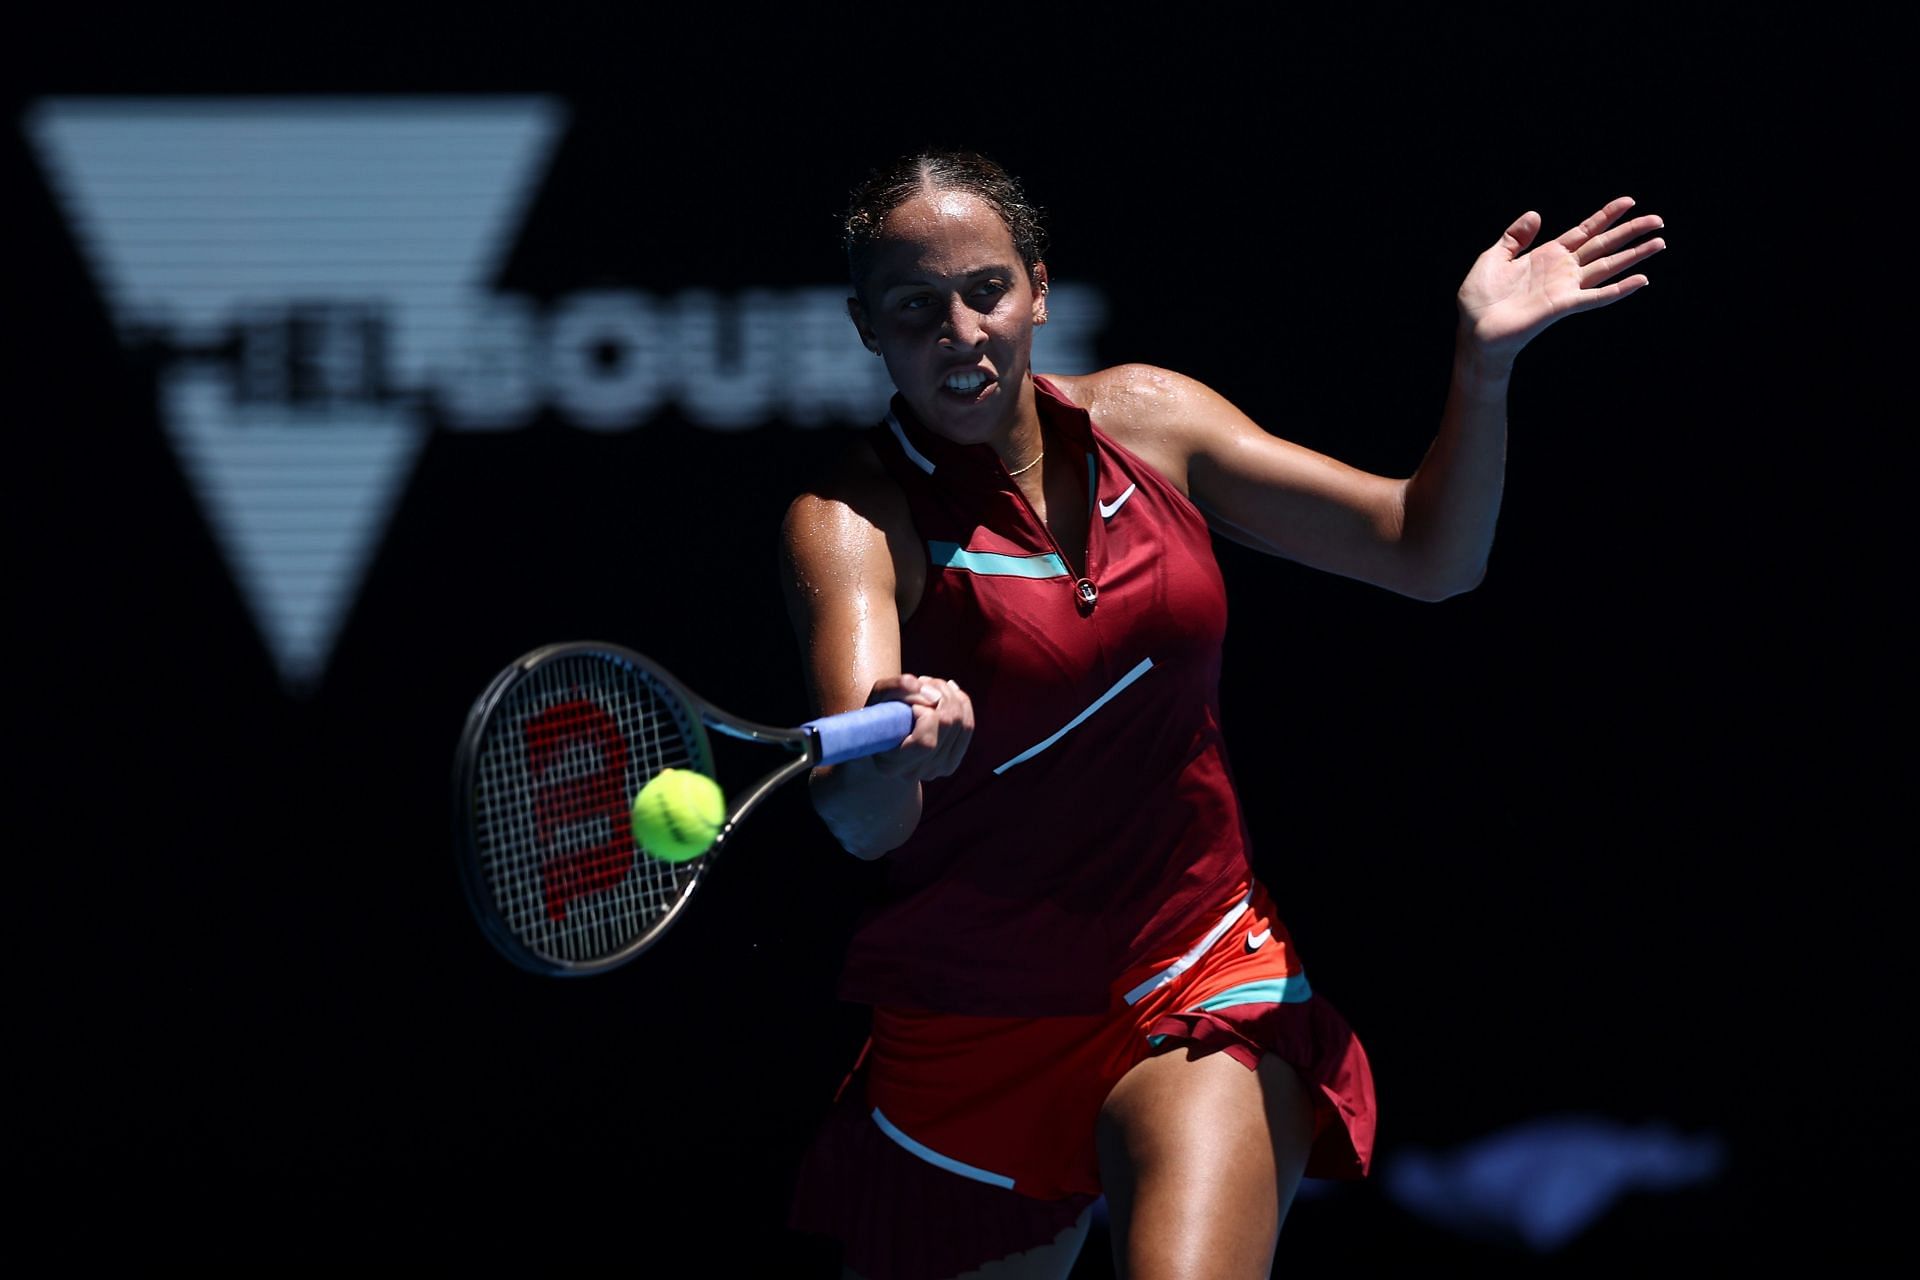 Madison Keys has reached the semifinals of the Australian Open after seven long years